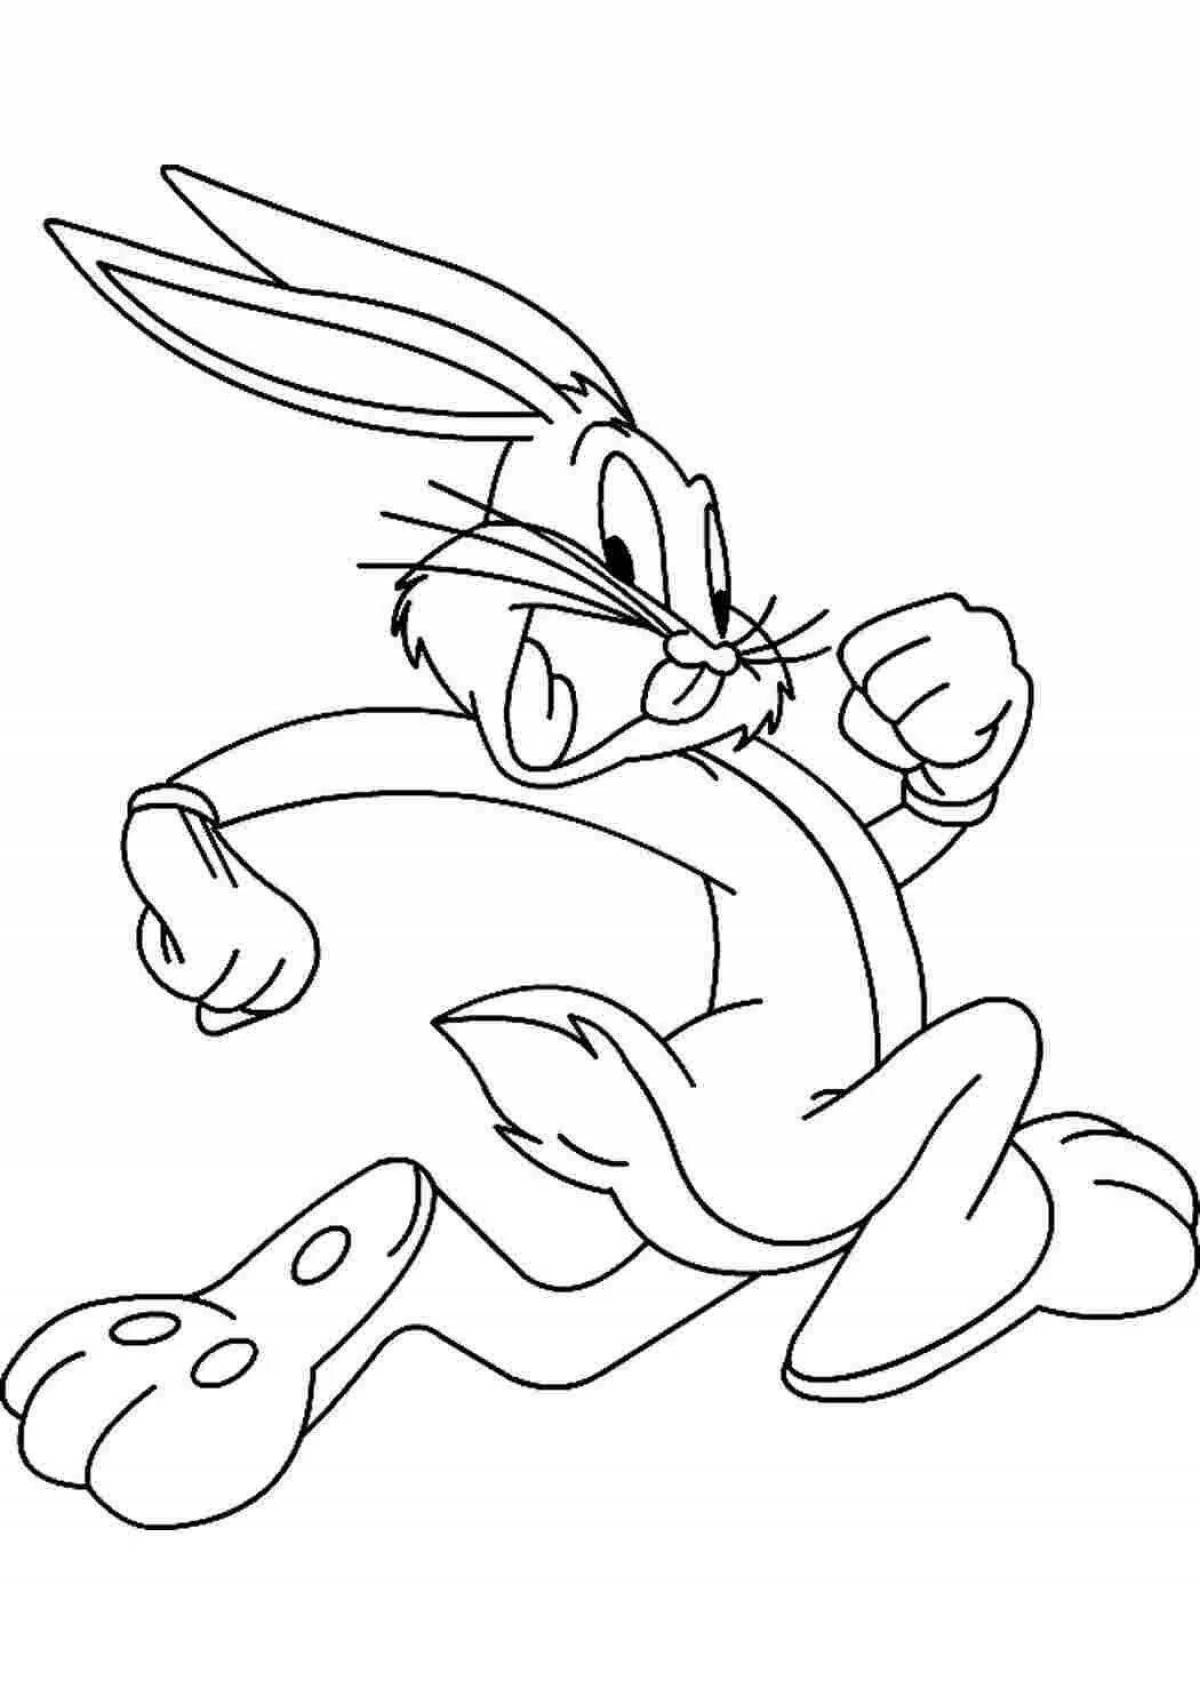 Coloring book quirky cartoon hare